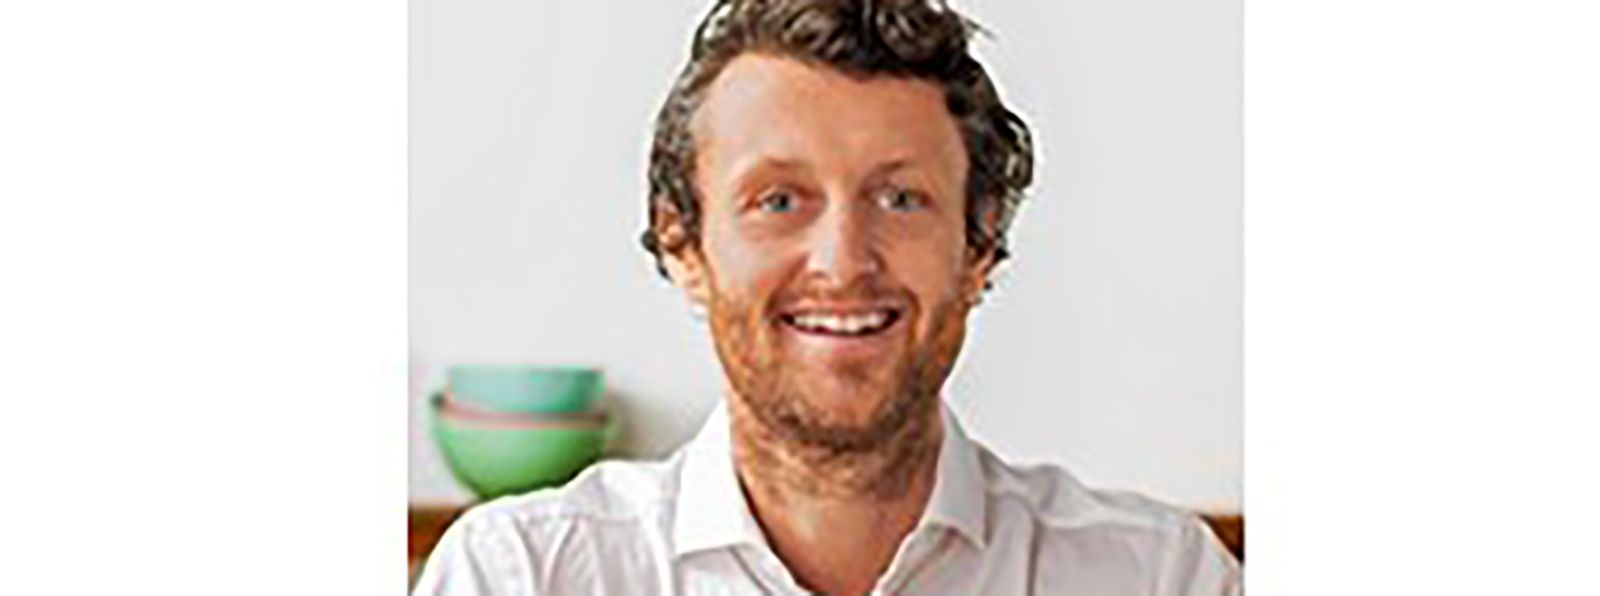 Markus Windisch Coo Of Hellofresh At The Upcoming Iea Berlin Conference How We Became Europe S Fastest Growing Company With The Largest D2c Supply Chain Worldwide Whu